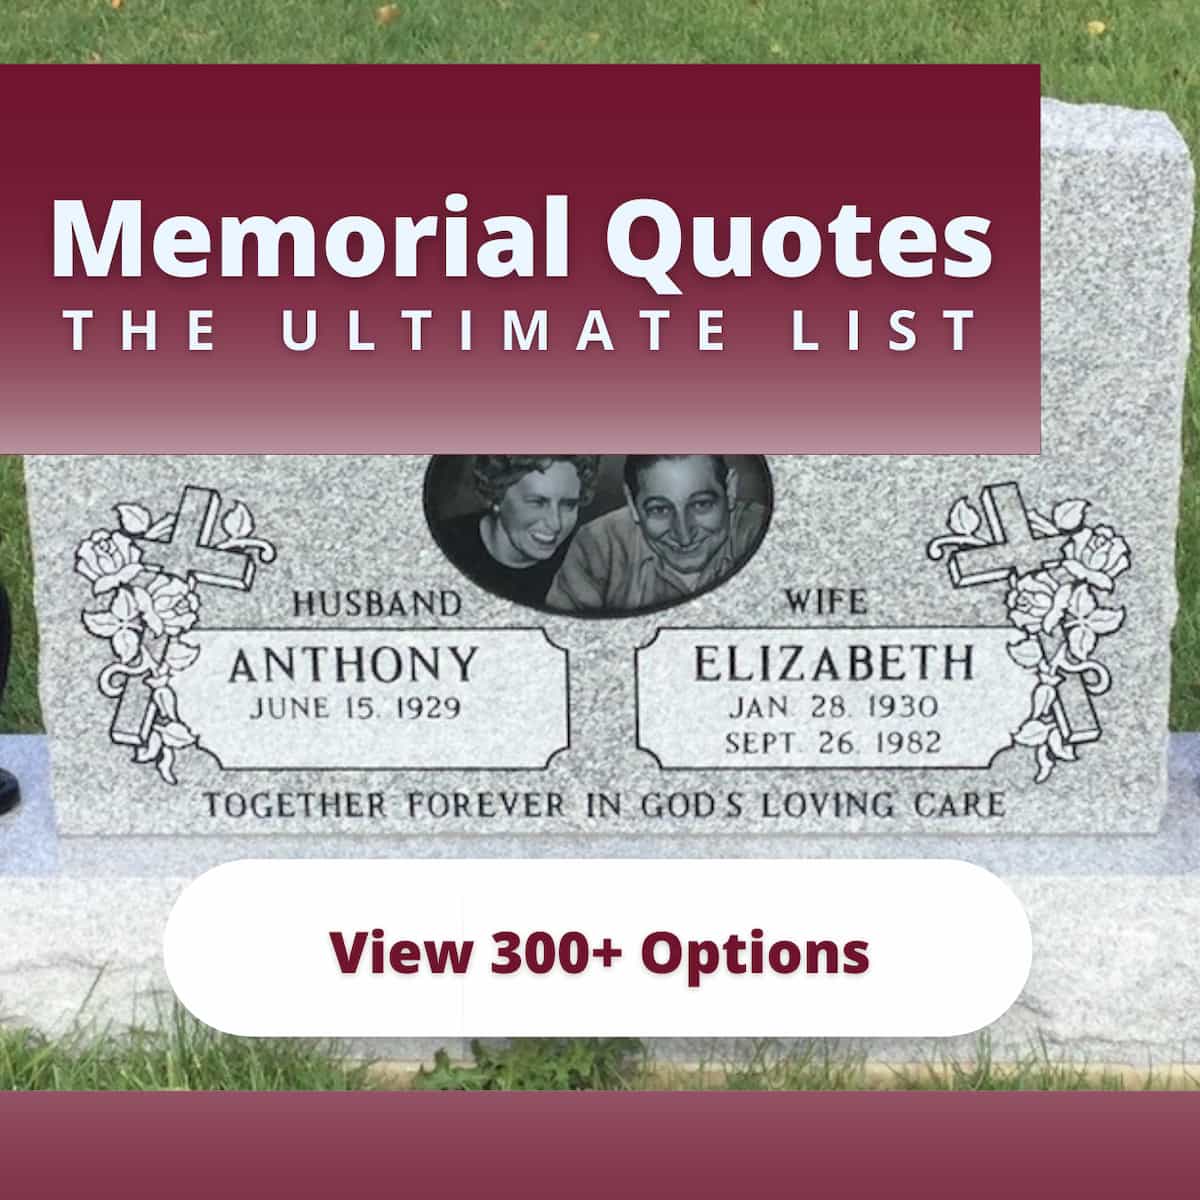 120+ Memorial Quotes to Write on a Memorial